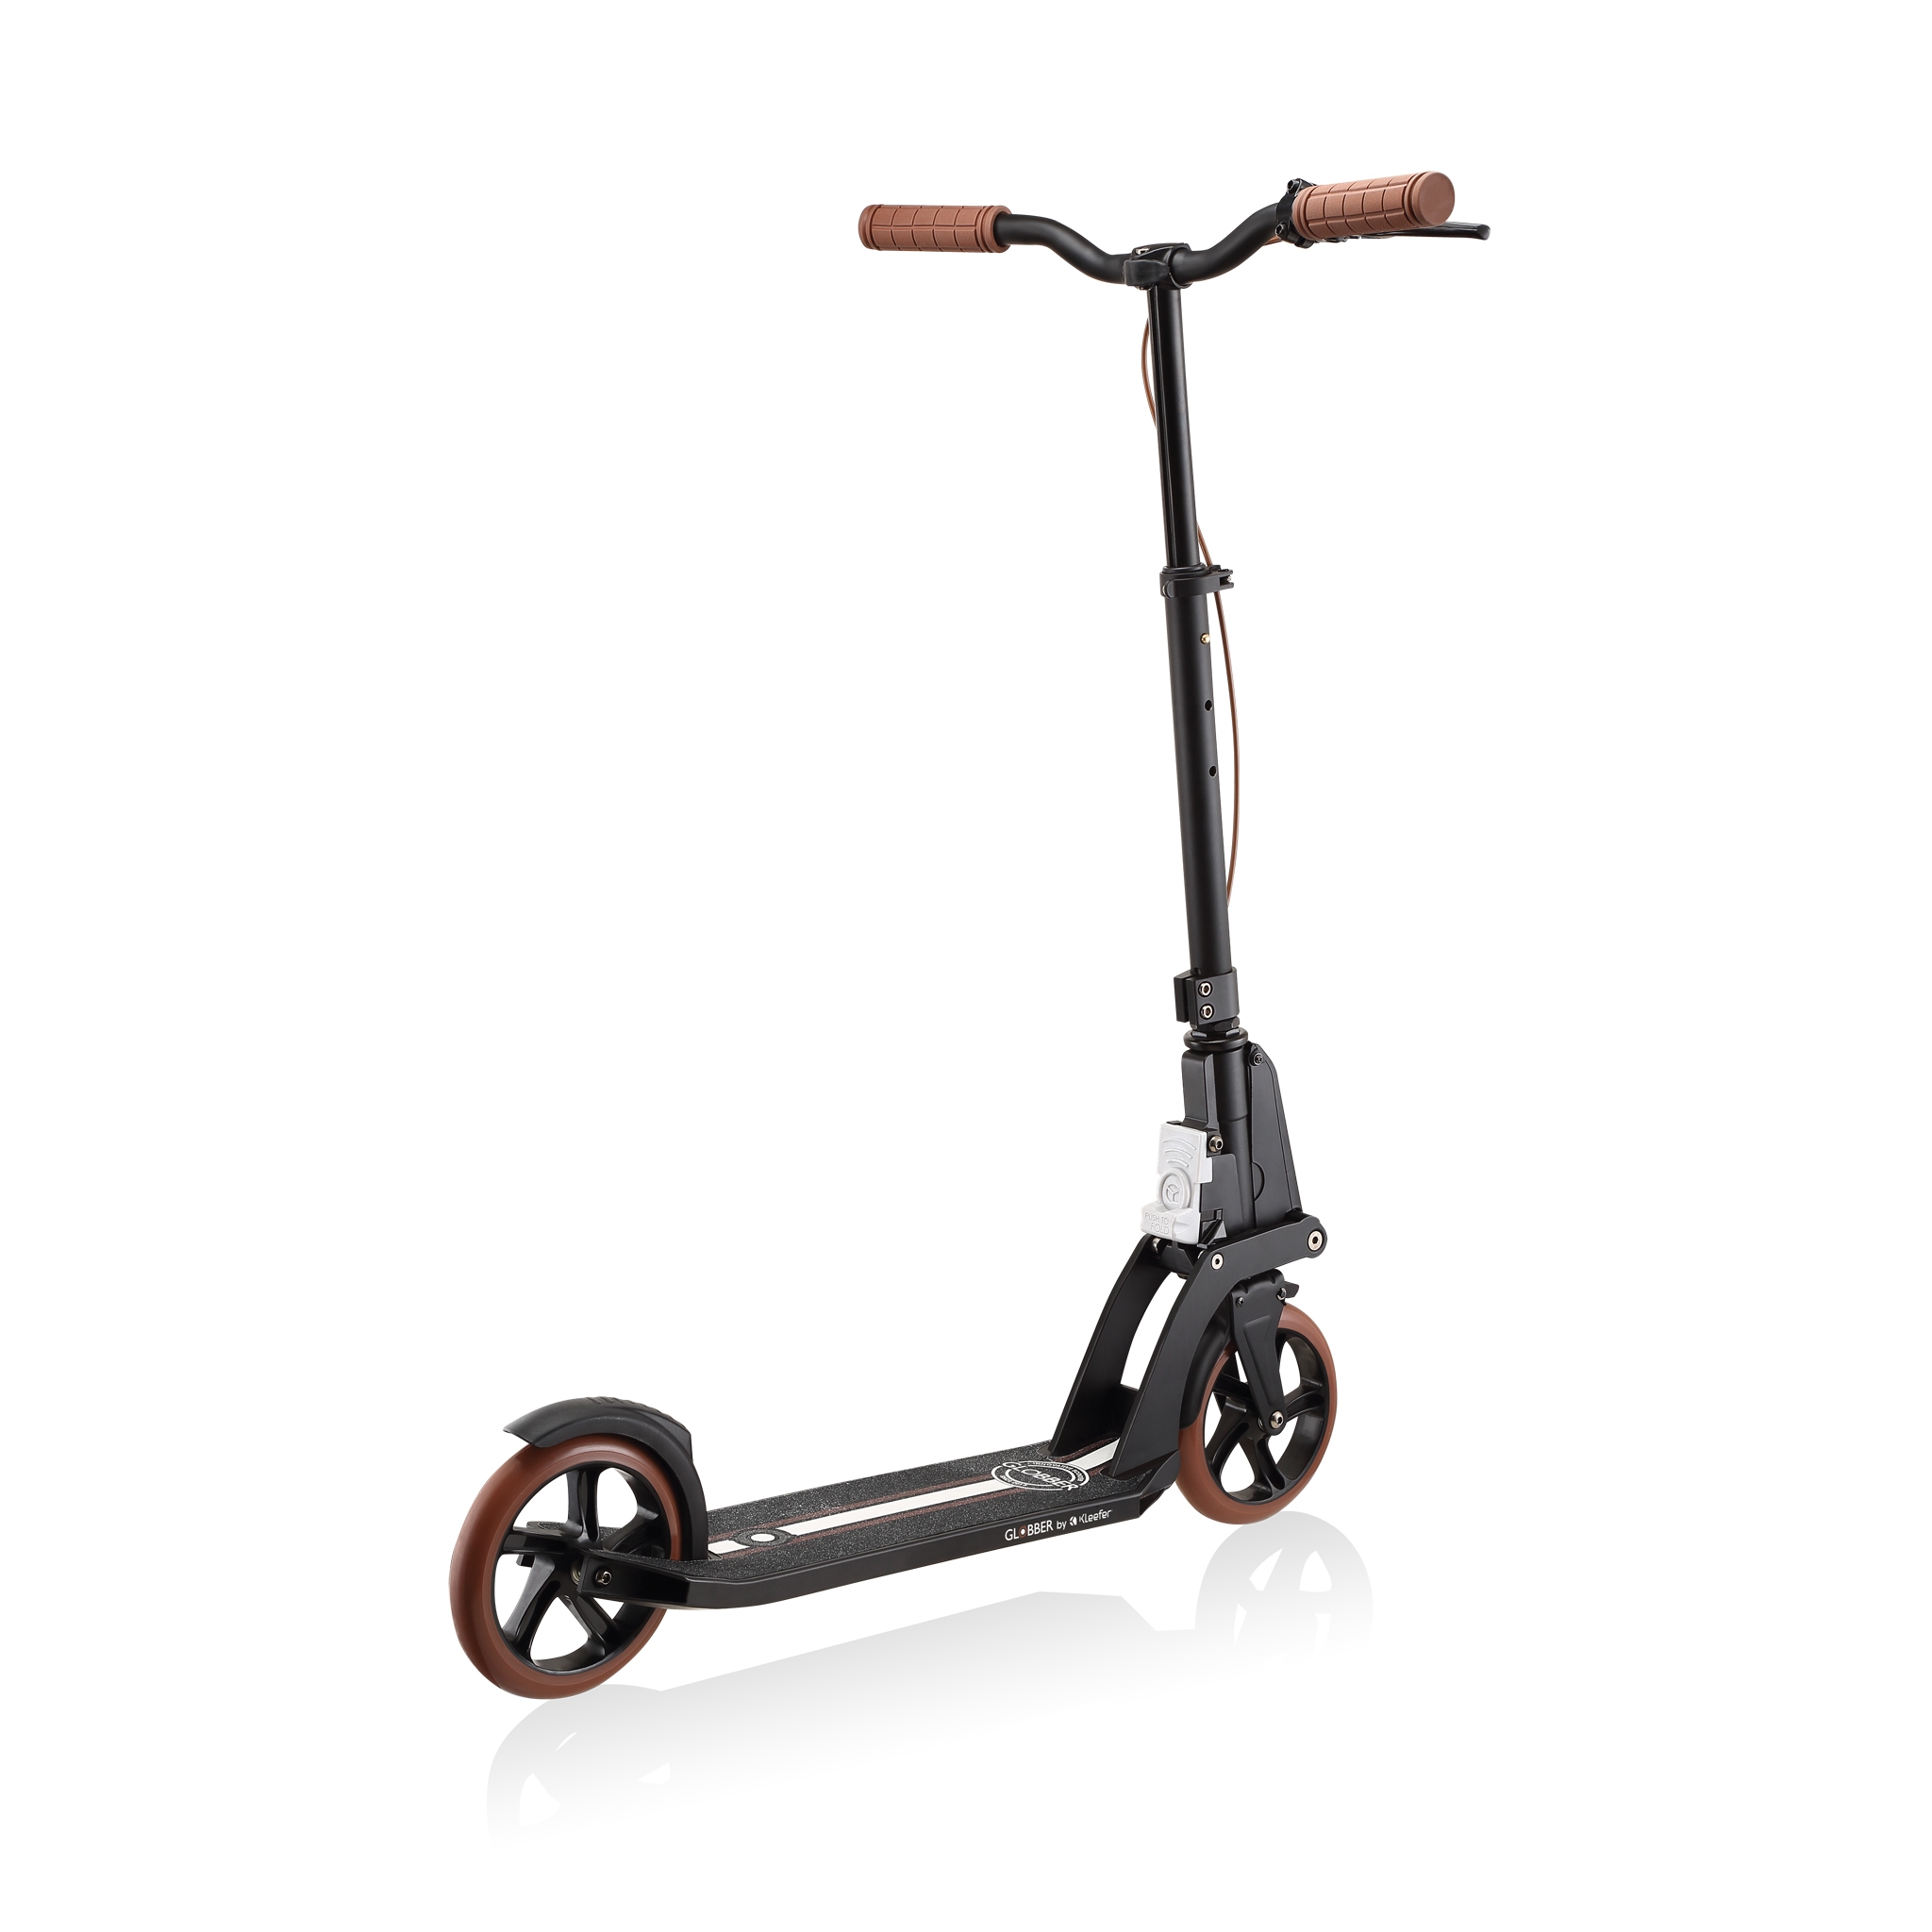 ONE-K-180-PISTON-DELUXE-extra-safe-foldable-kick-scooter-for-adults-with-2-brakes 5